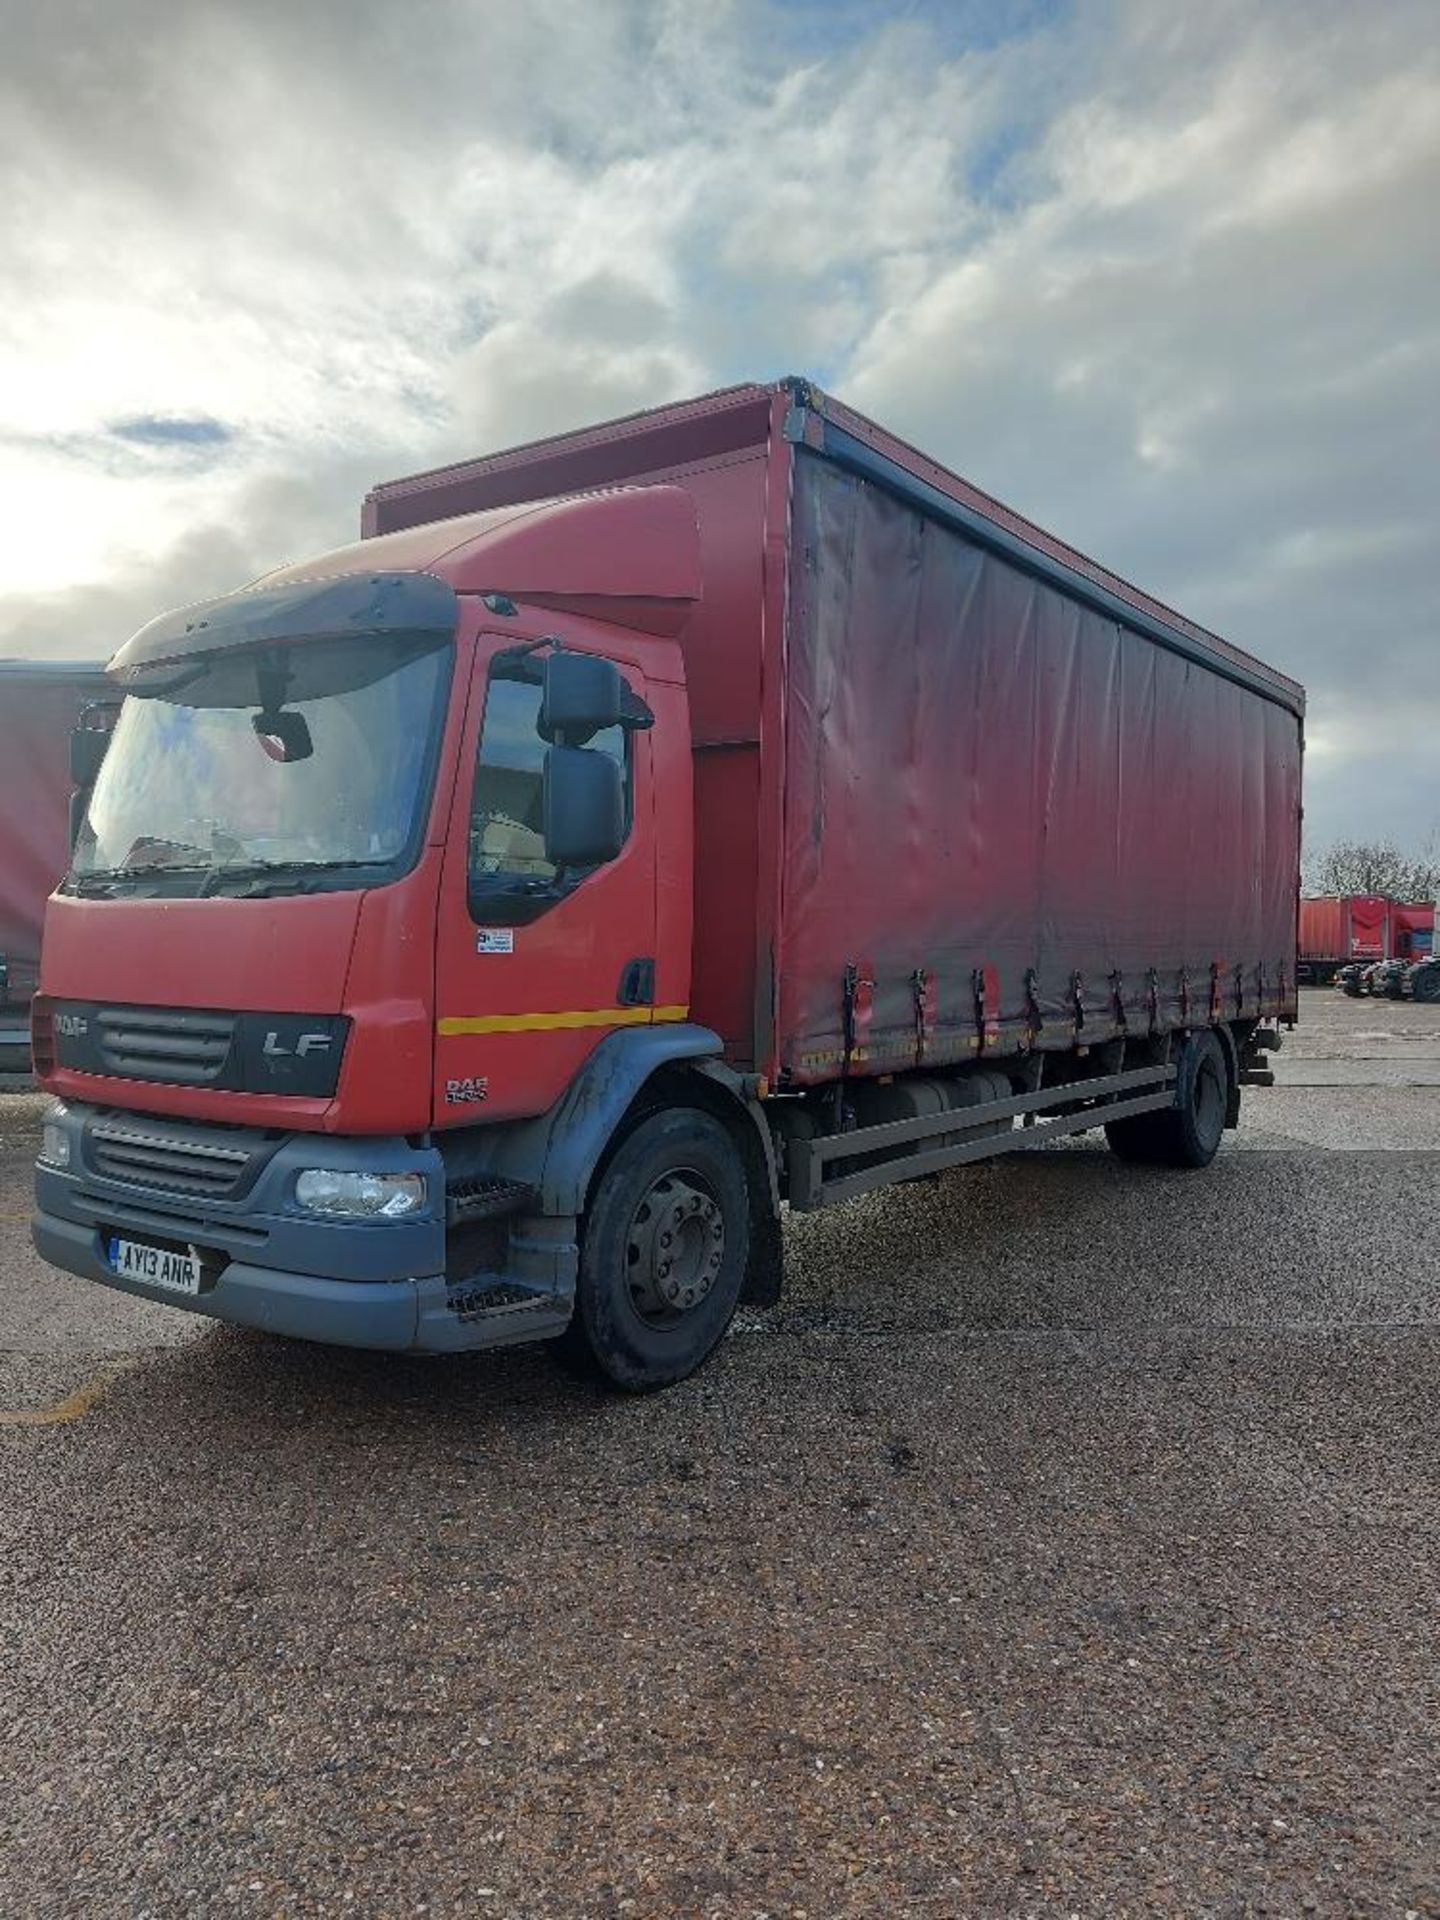 DAF L55.250 4x2 Rigid 18T Curtain Side Lorry with Tail Lift - Image 2 of 10